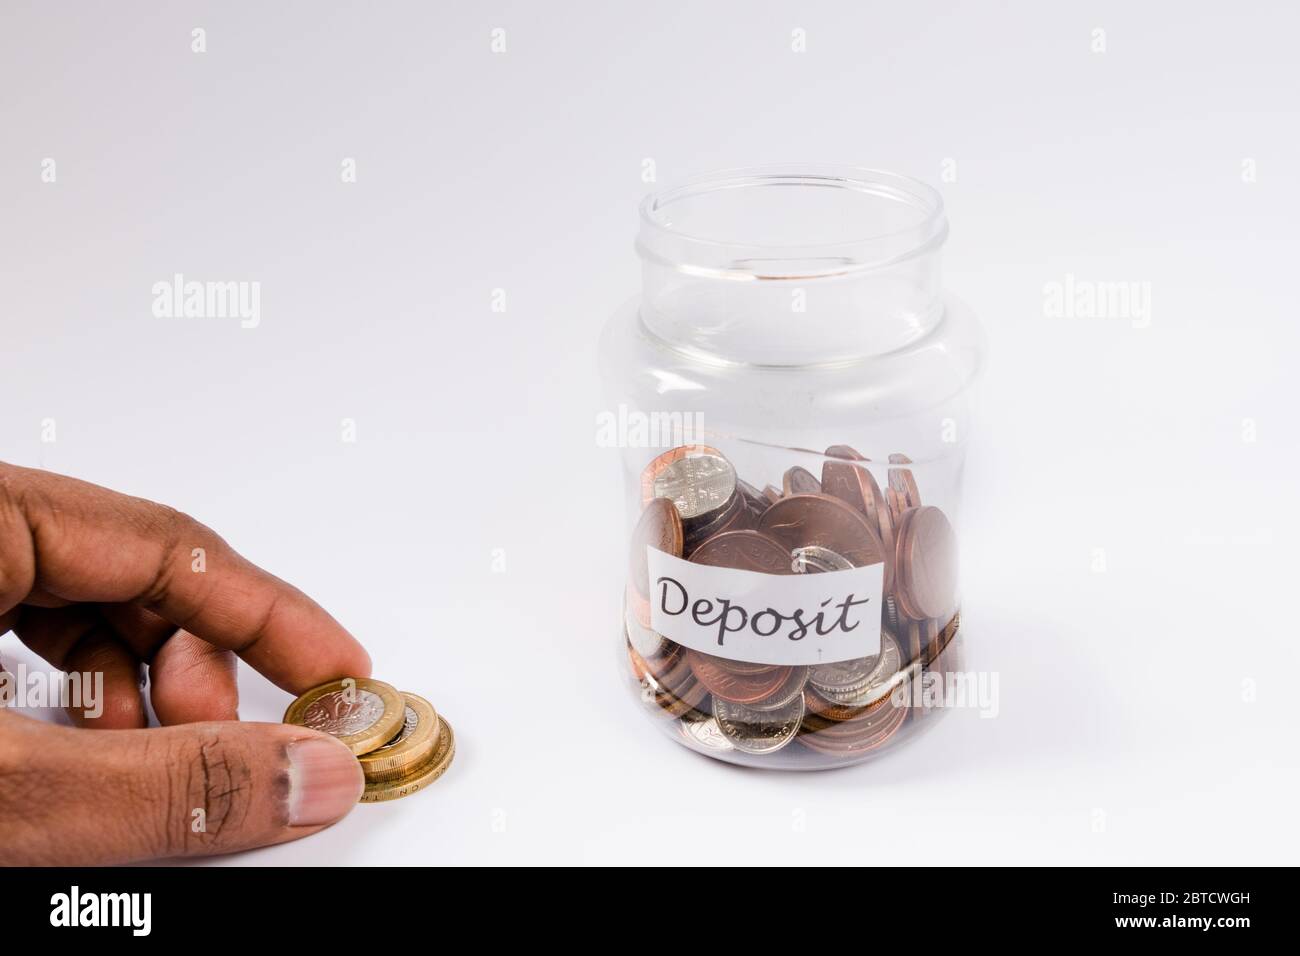 Money being added or removed from a Deposit jar saving pennies Stock Photo